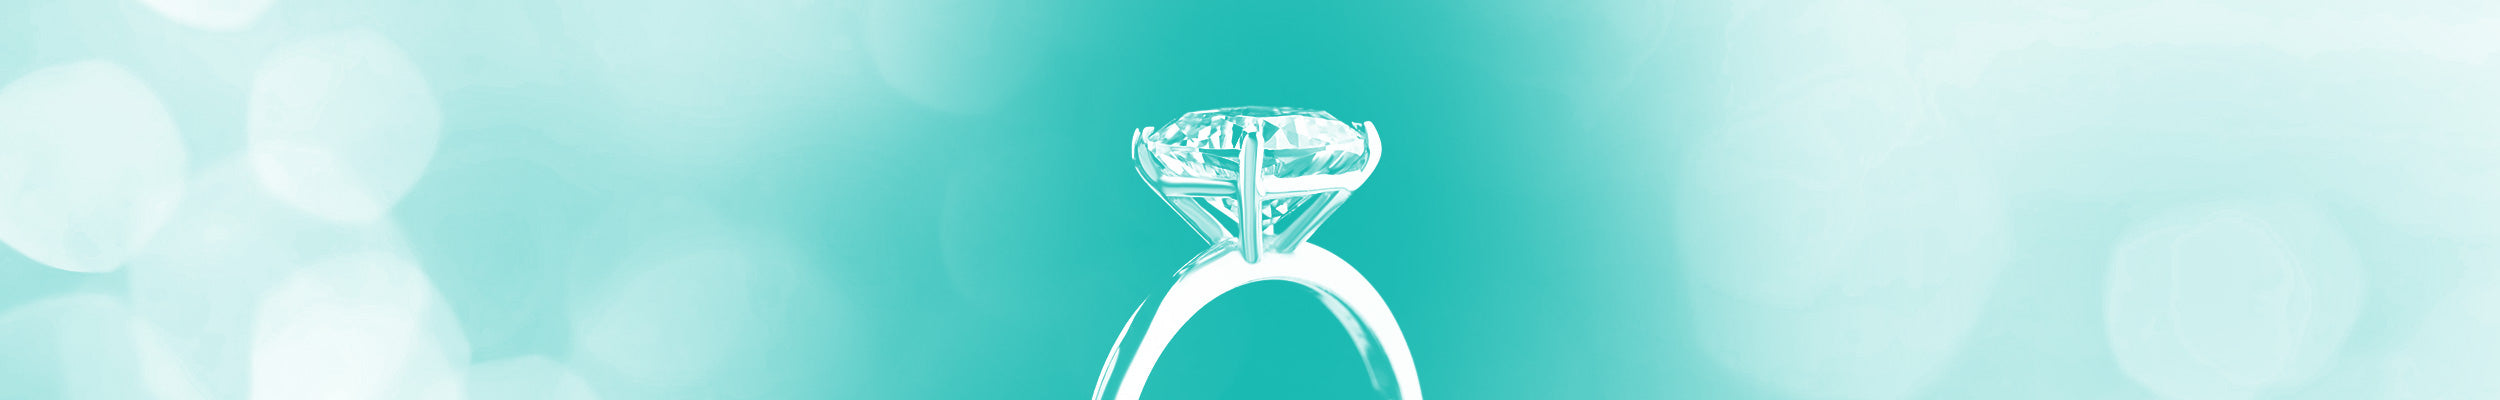 A solitaire diamond engagement ring on a teal background.